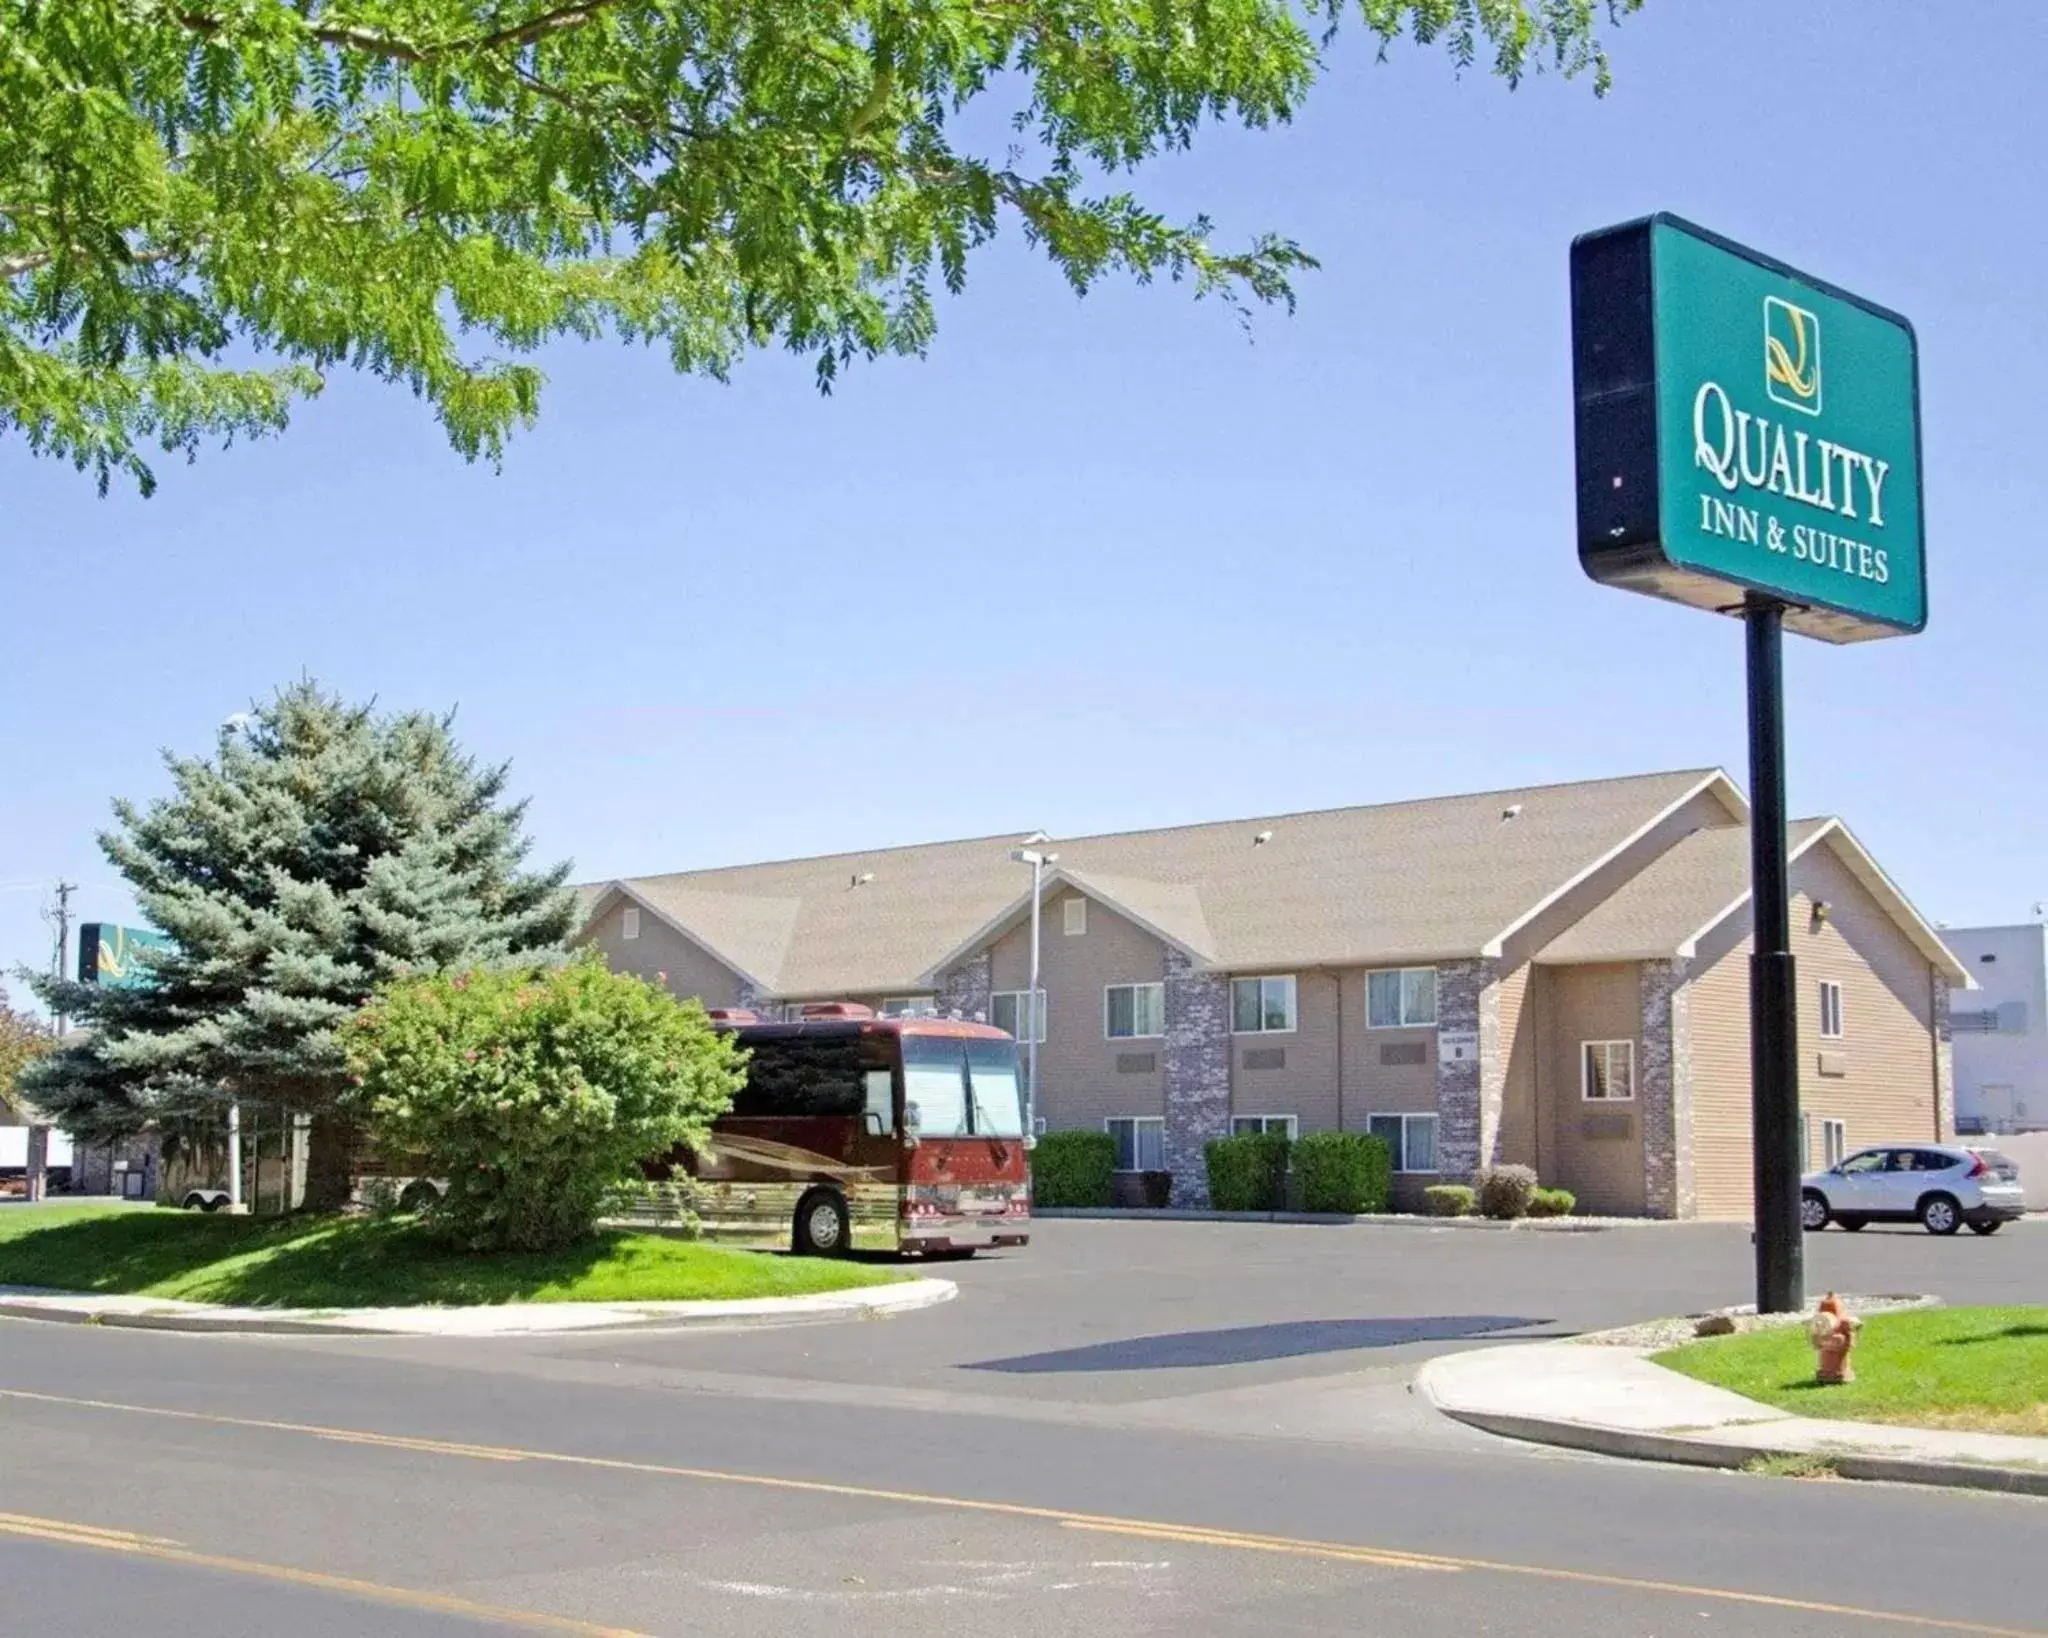 Property building in Quality Inn & Suites Twin Falls